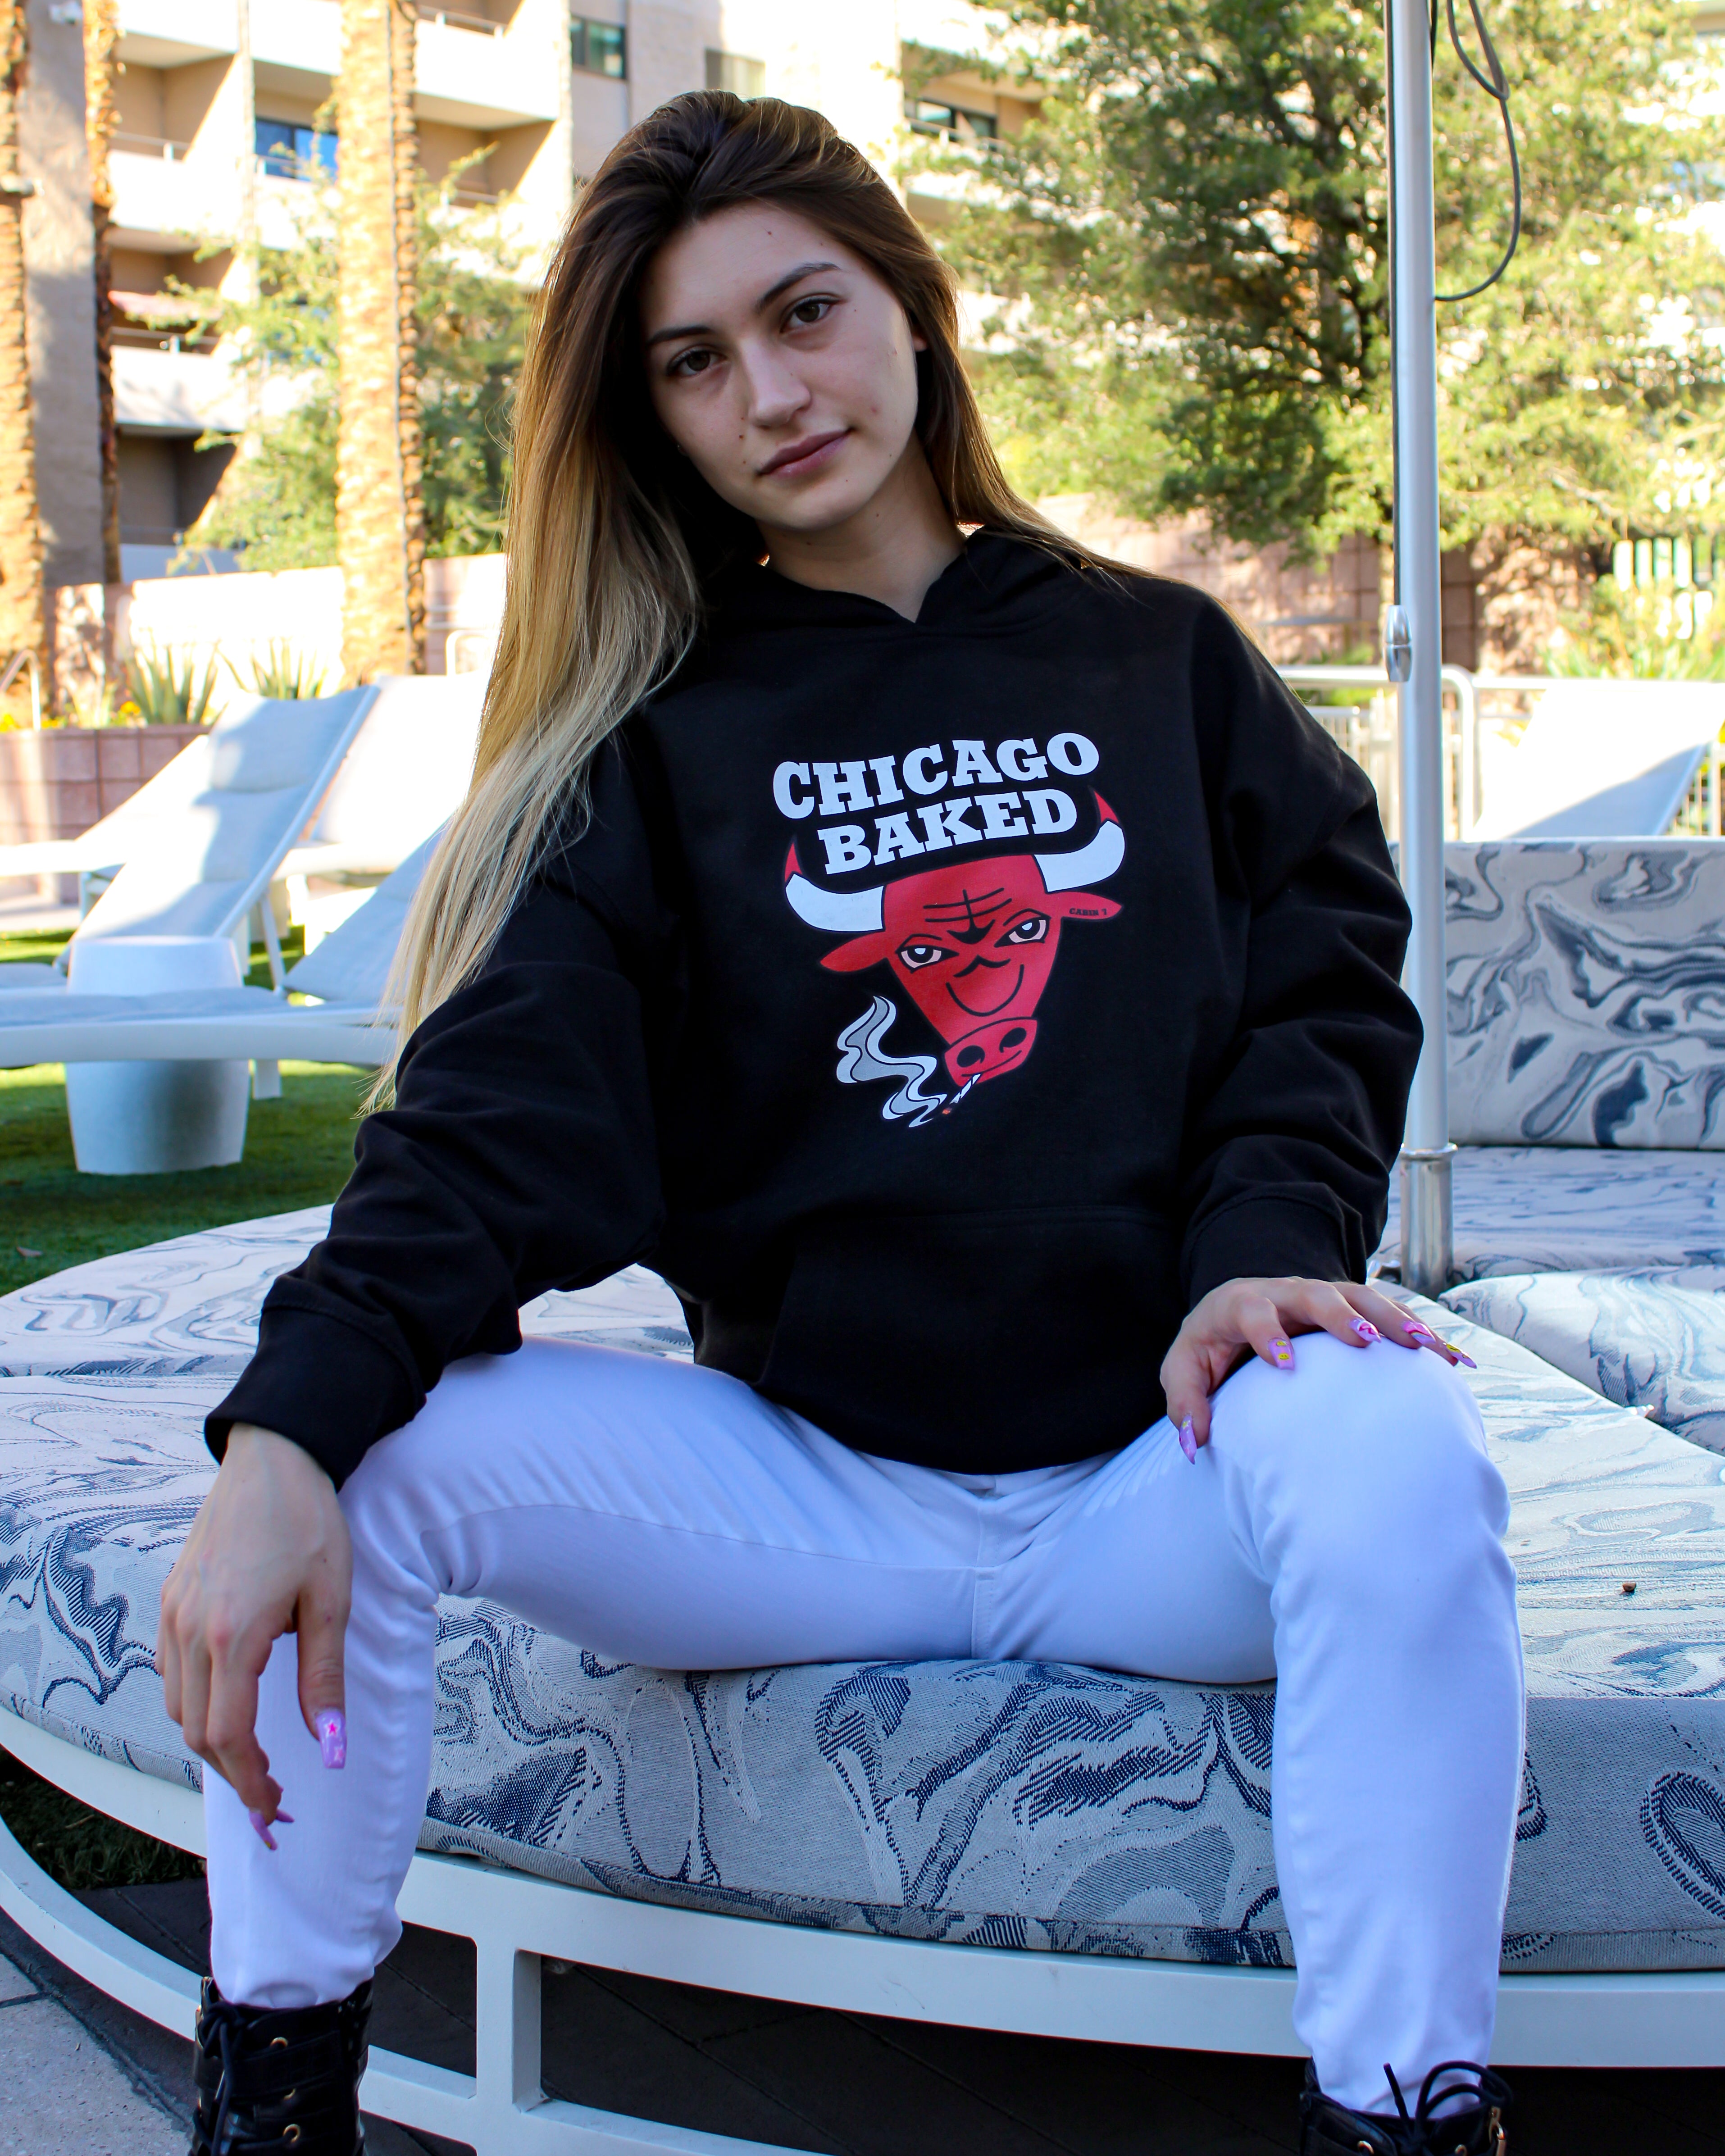 Chicago Baked Hoodie